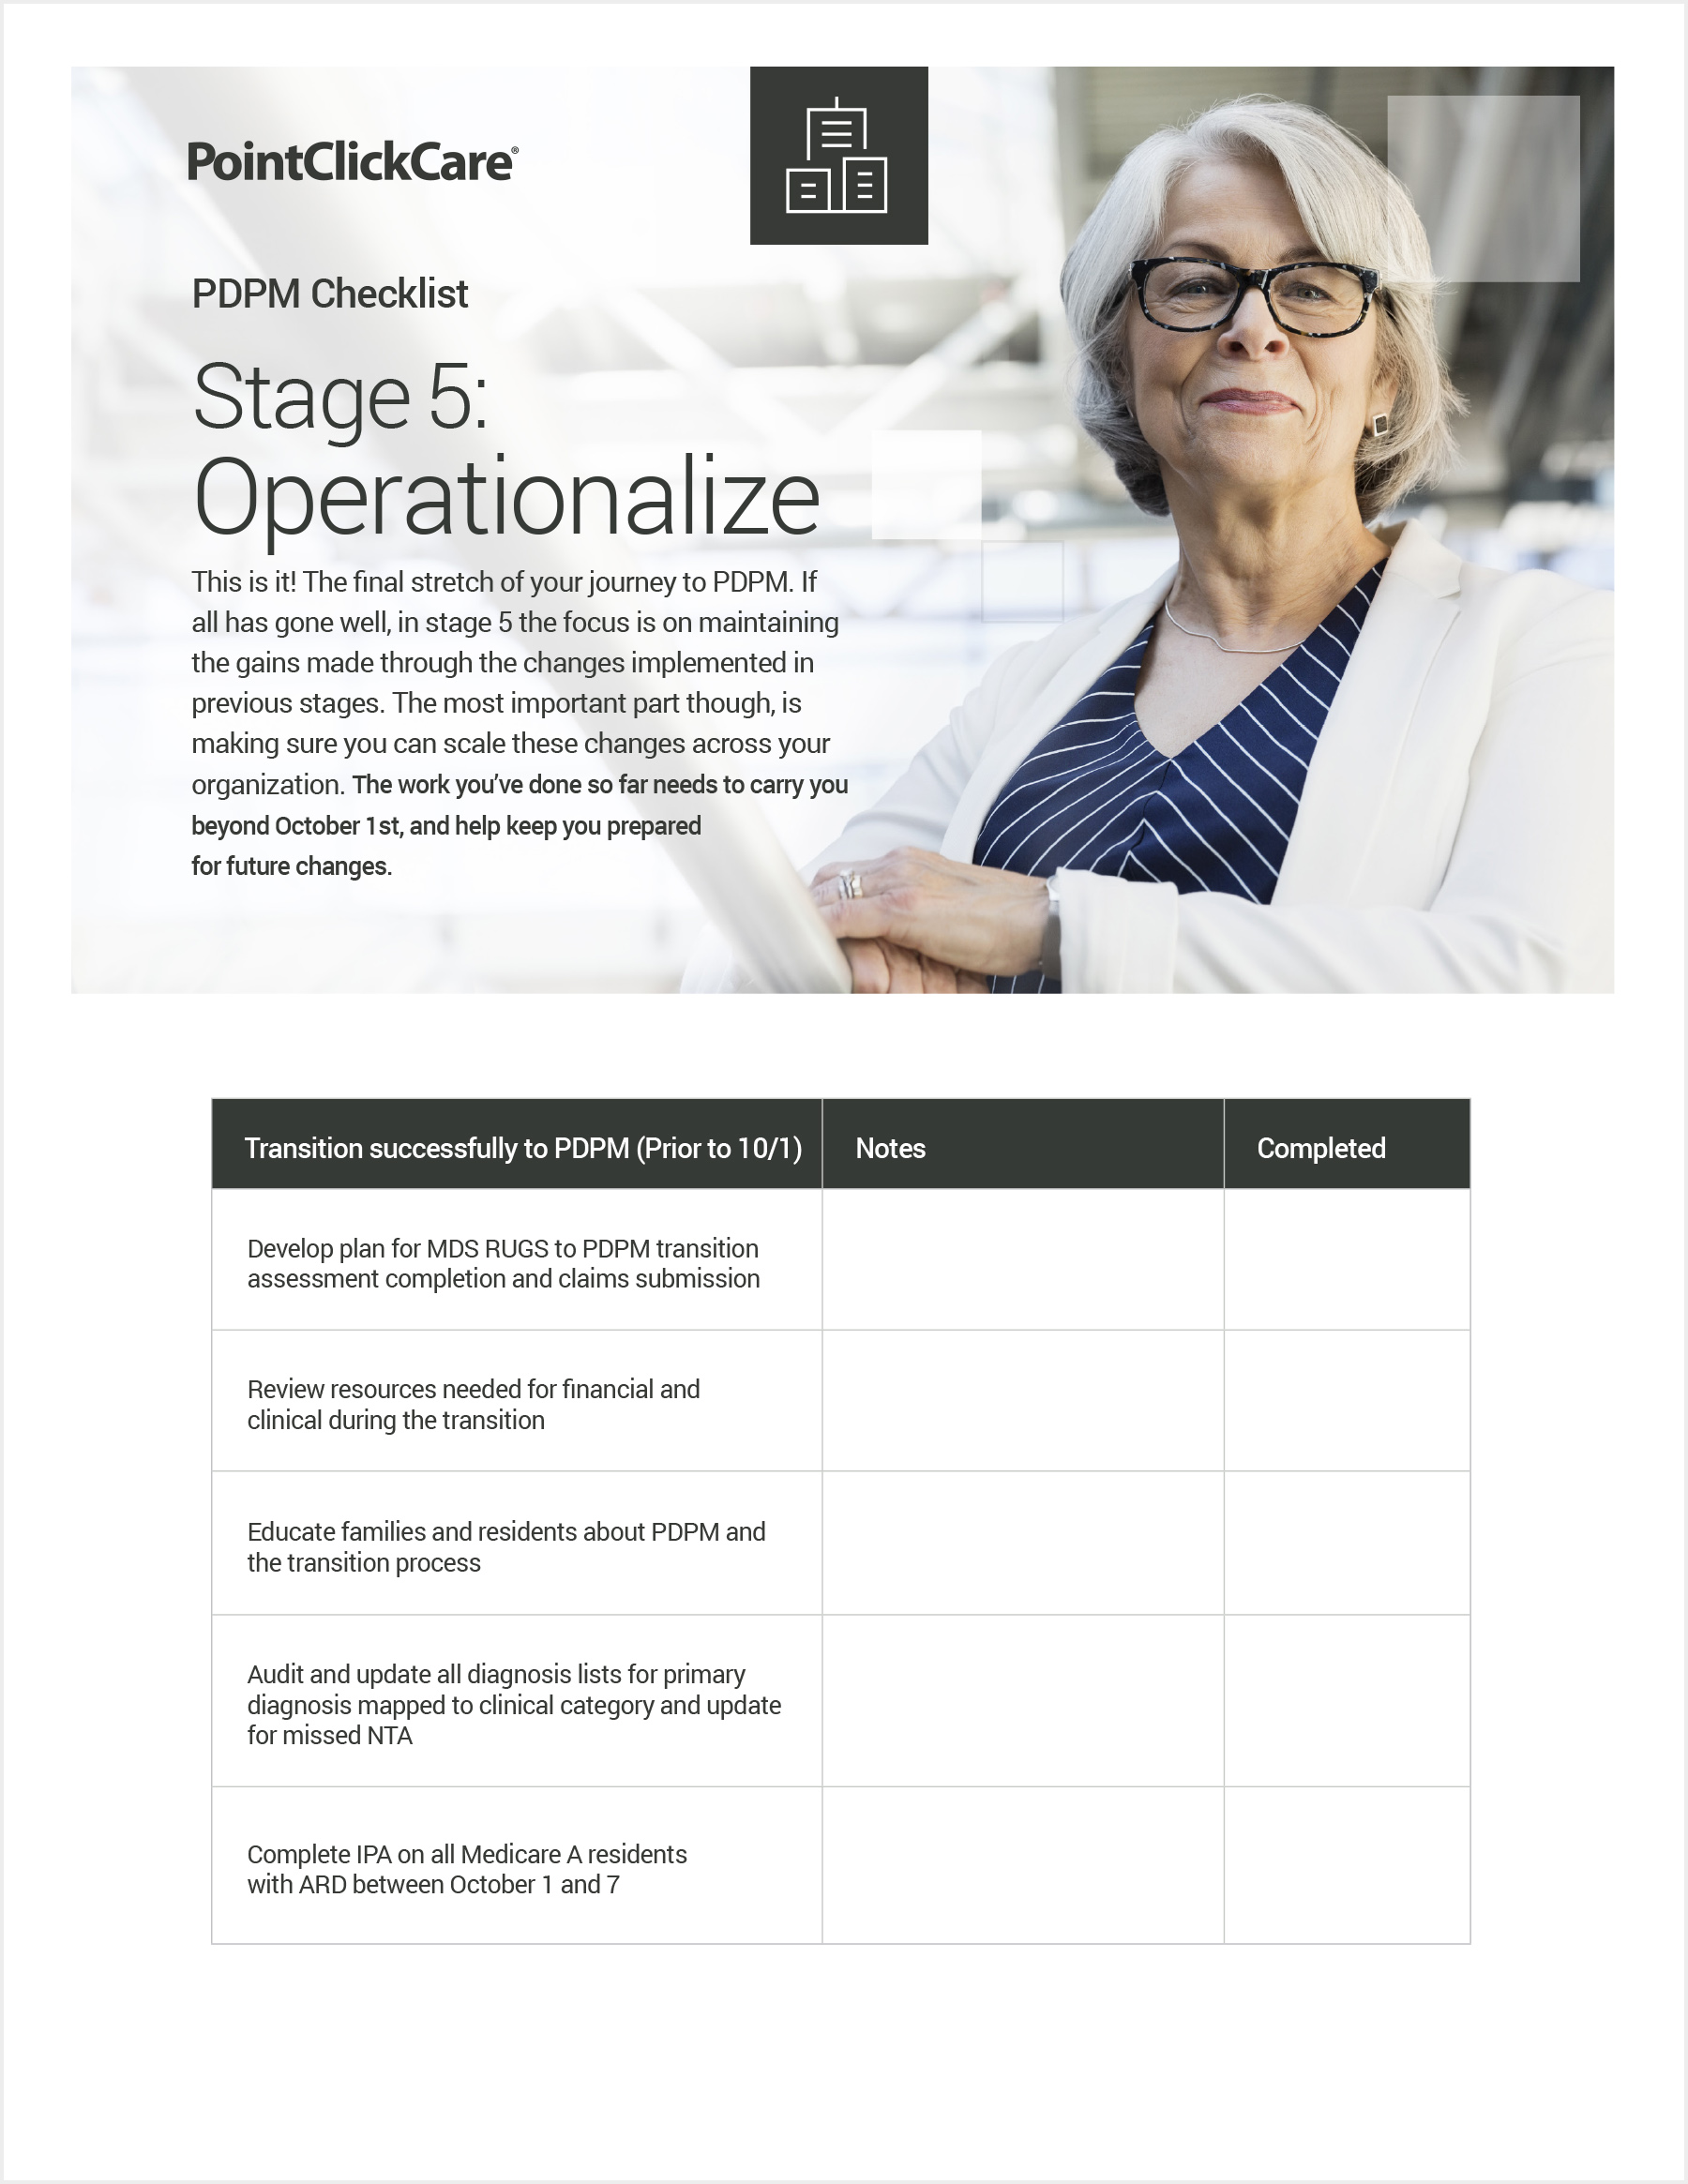 pdpm-checklist-stage-5-operationalize-cover-pg